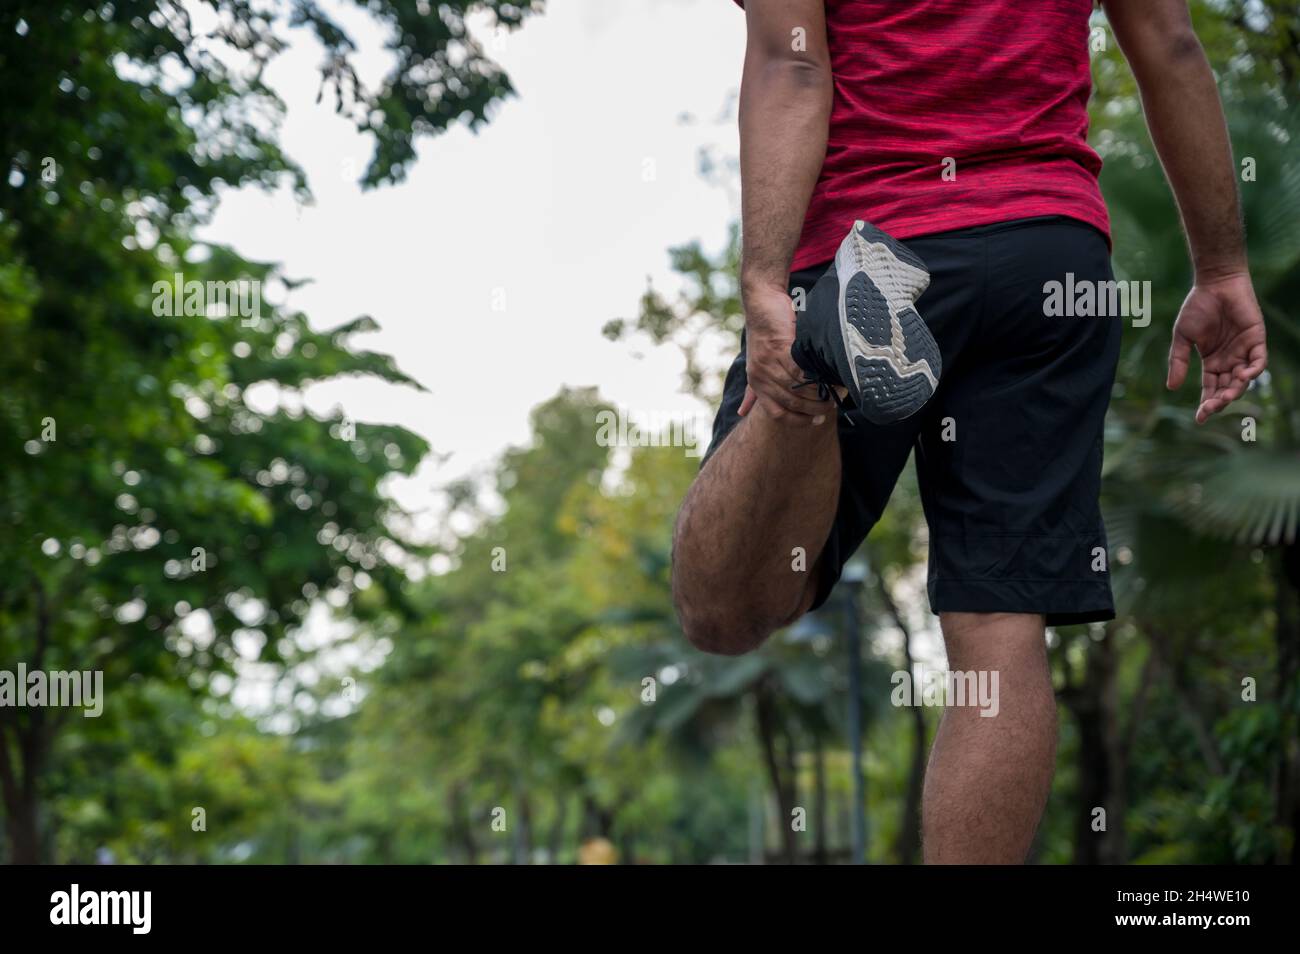 Young Fitness Man Runner Stretching Before Run Healthy Lifestyle And